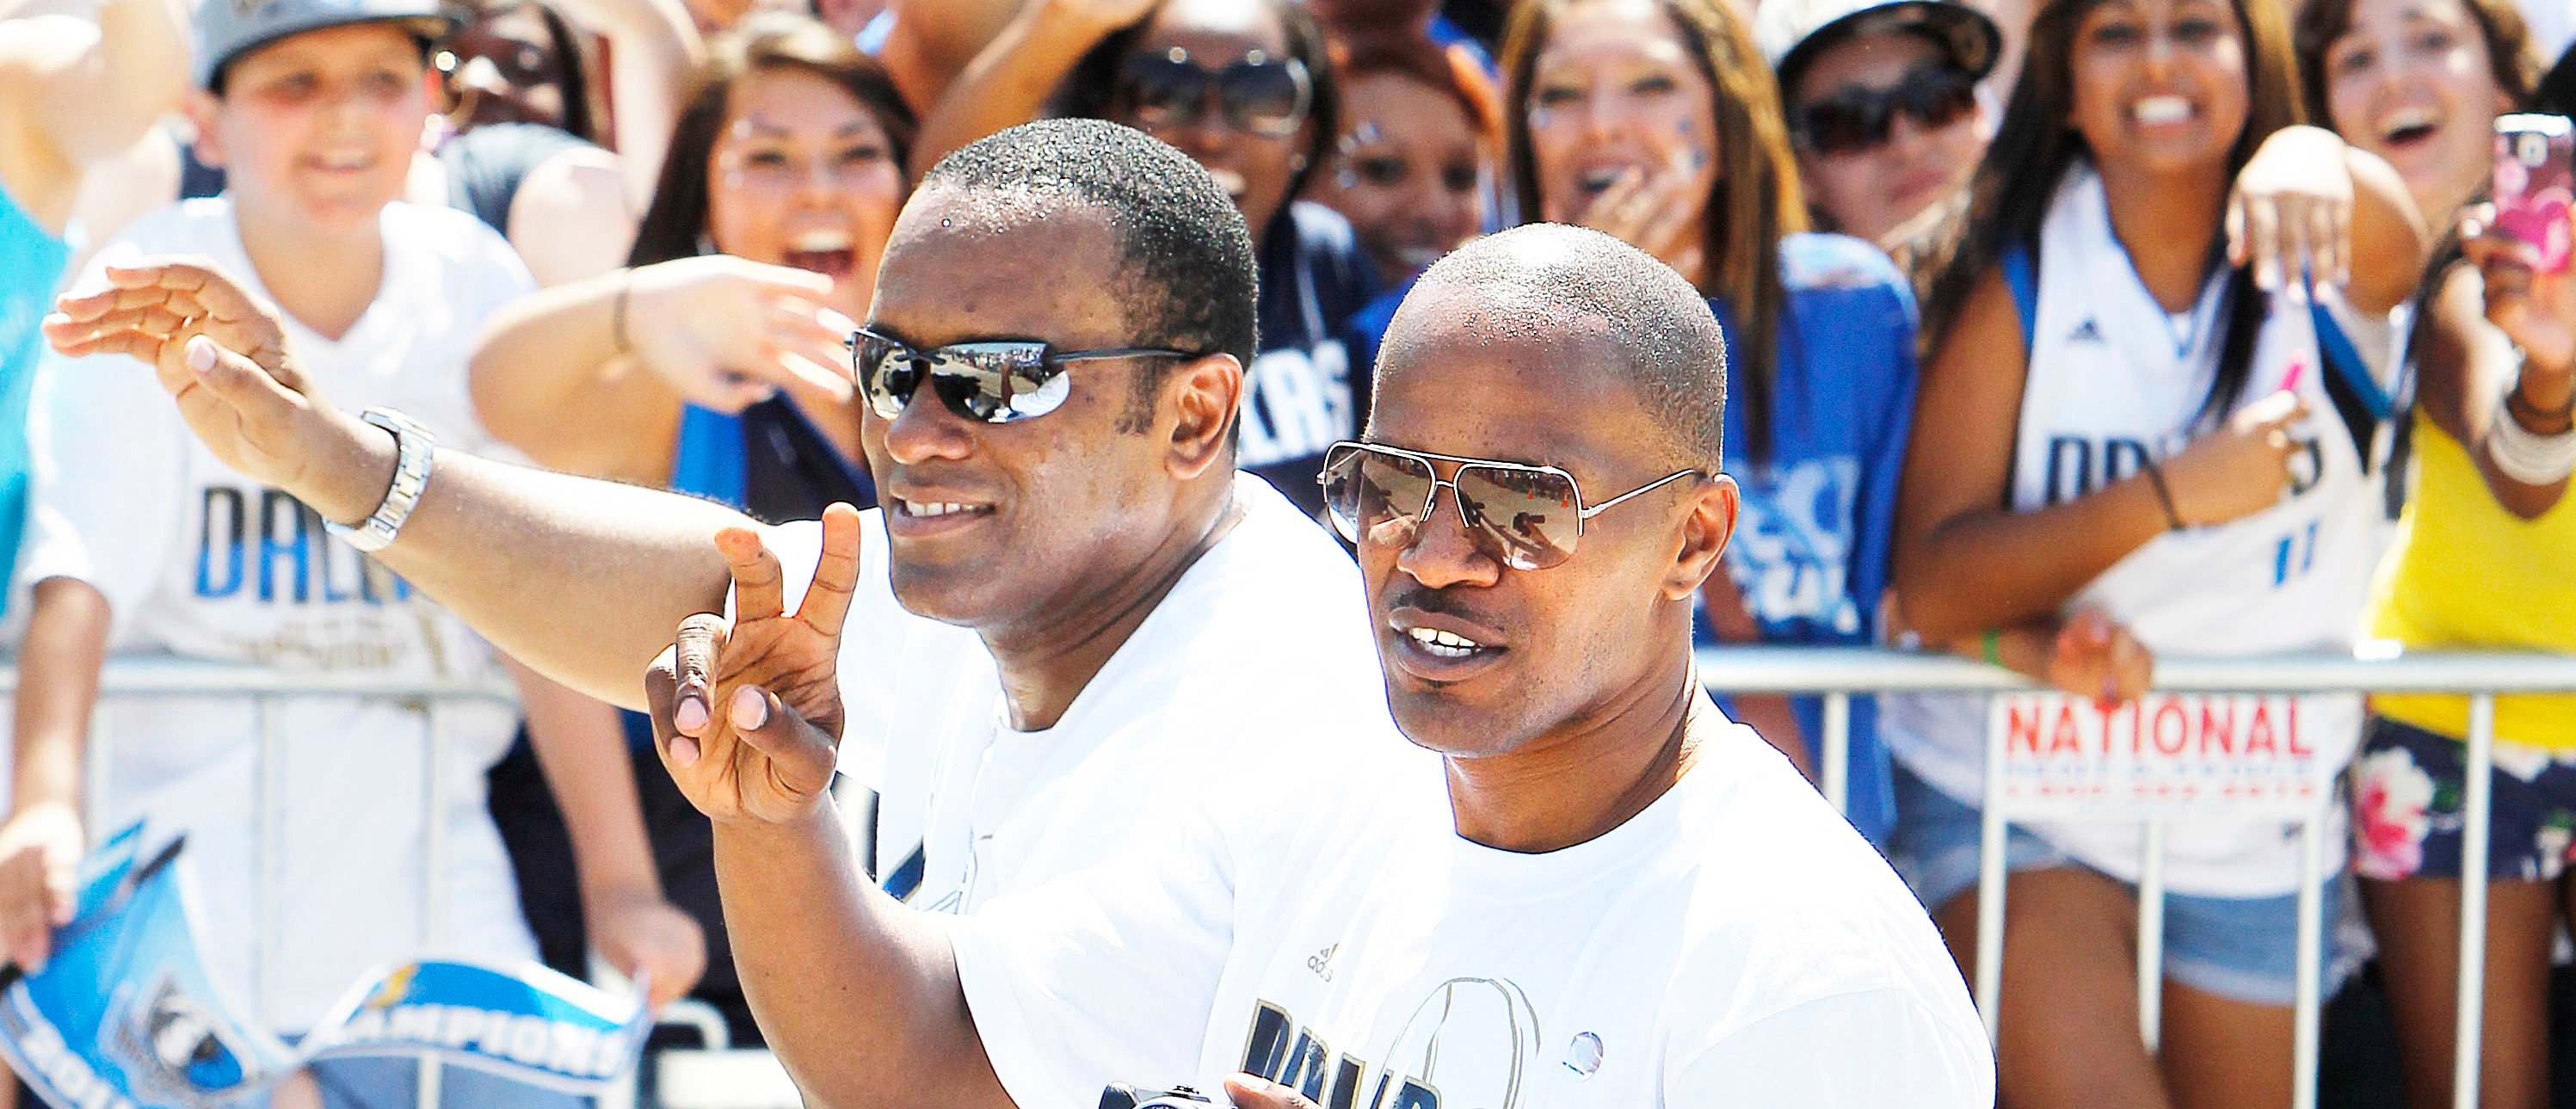 CEO of the Dallas Mavericks Terdema Ussery, left, and actor Jamie Foxx, right, during the Dallas Mavericks Victory Parade on June 16, 2011 in Dallas, Texas. (Photo by Brandon Wade/Getty Images)